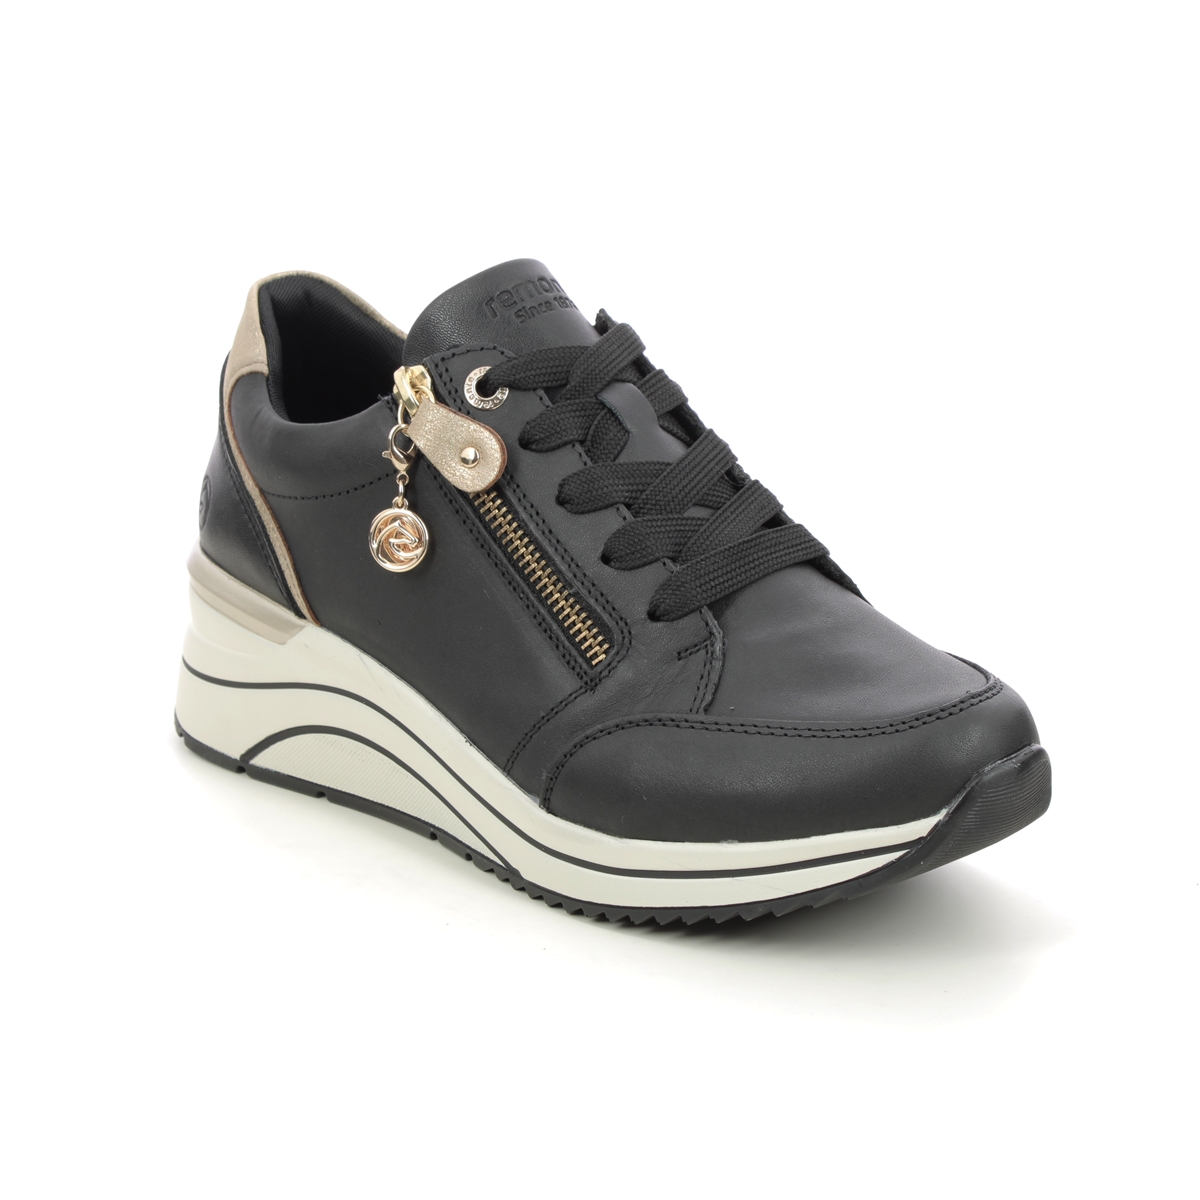 Remonte Ranzip Wedge Black Leather Womens Trainers D0T03-01 In Size 39 In Plain Black Leather